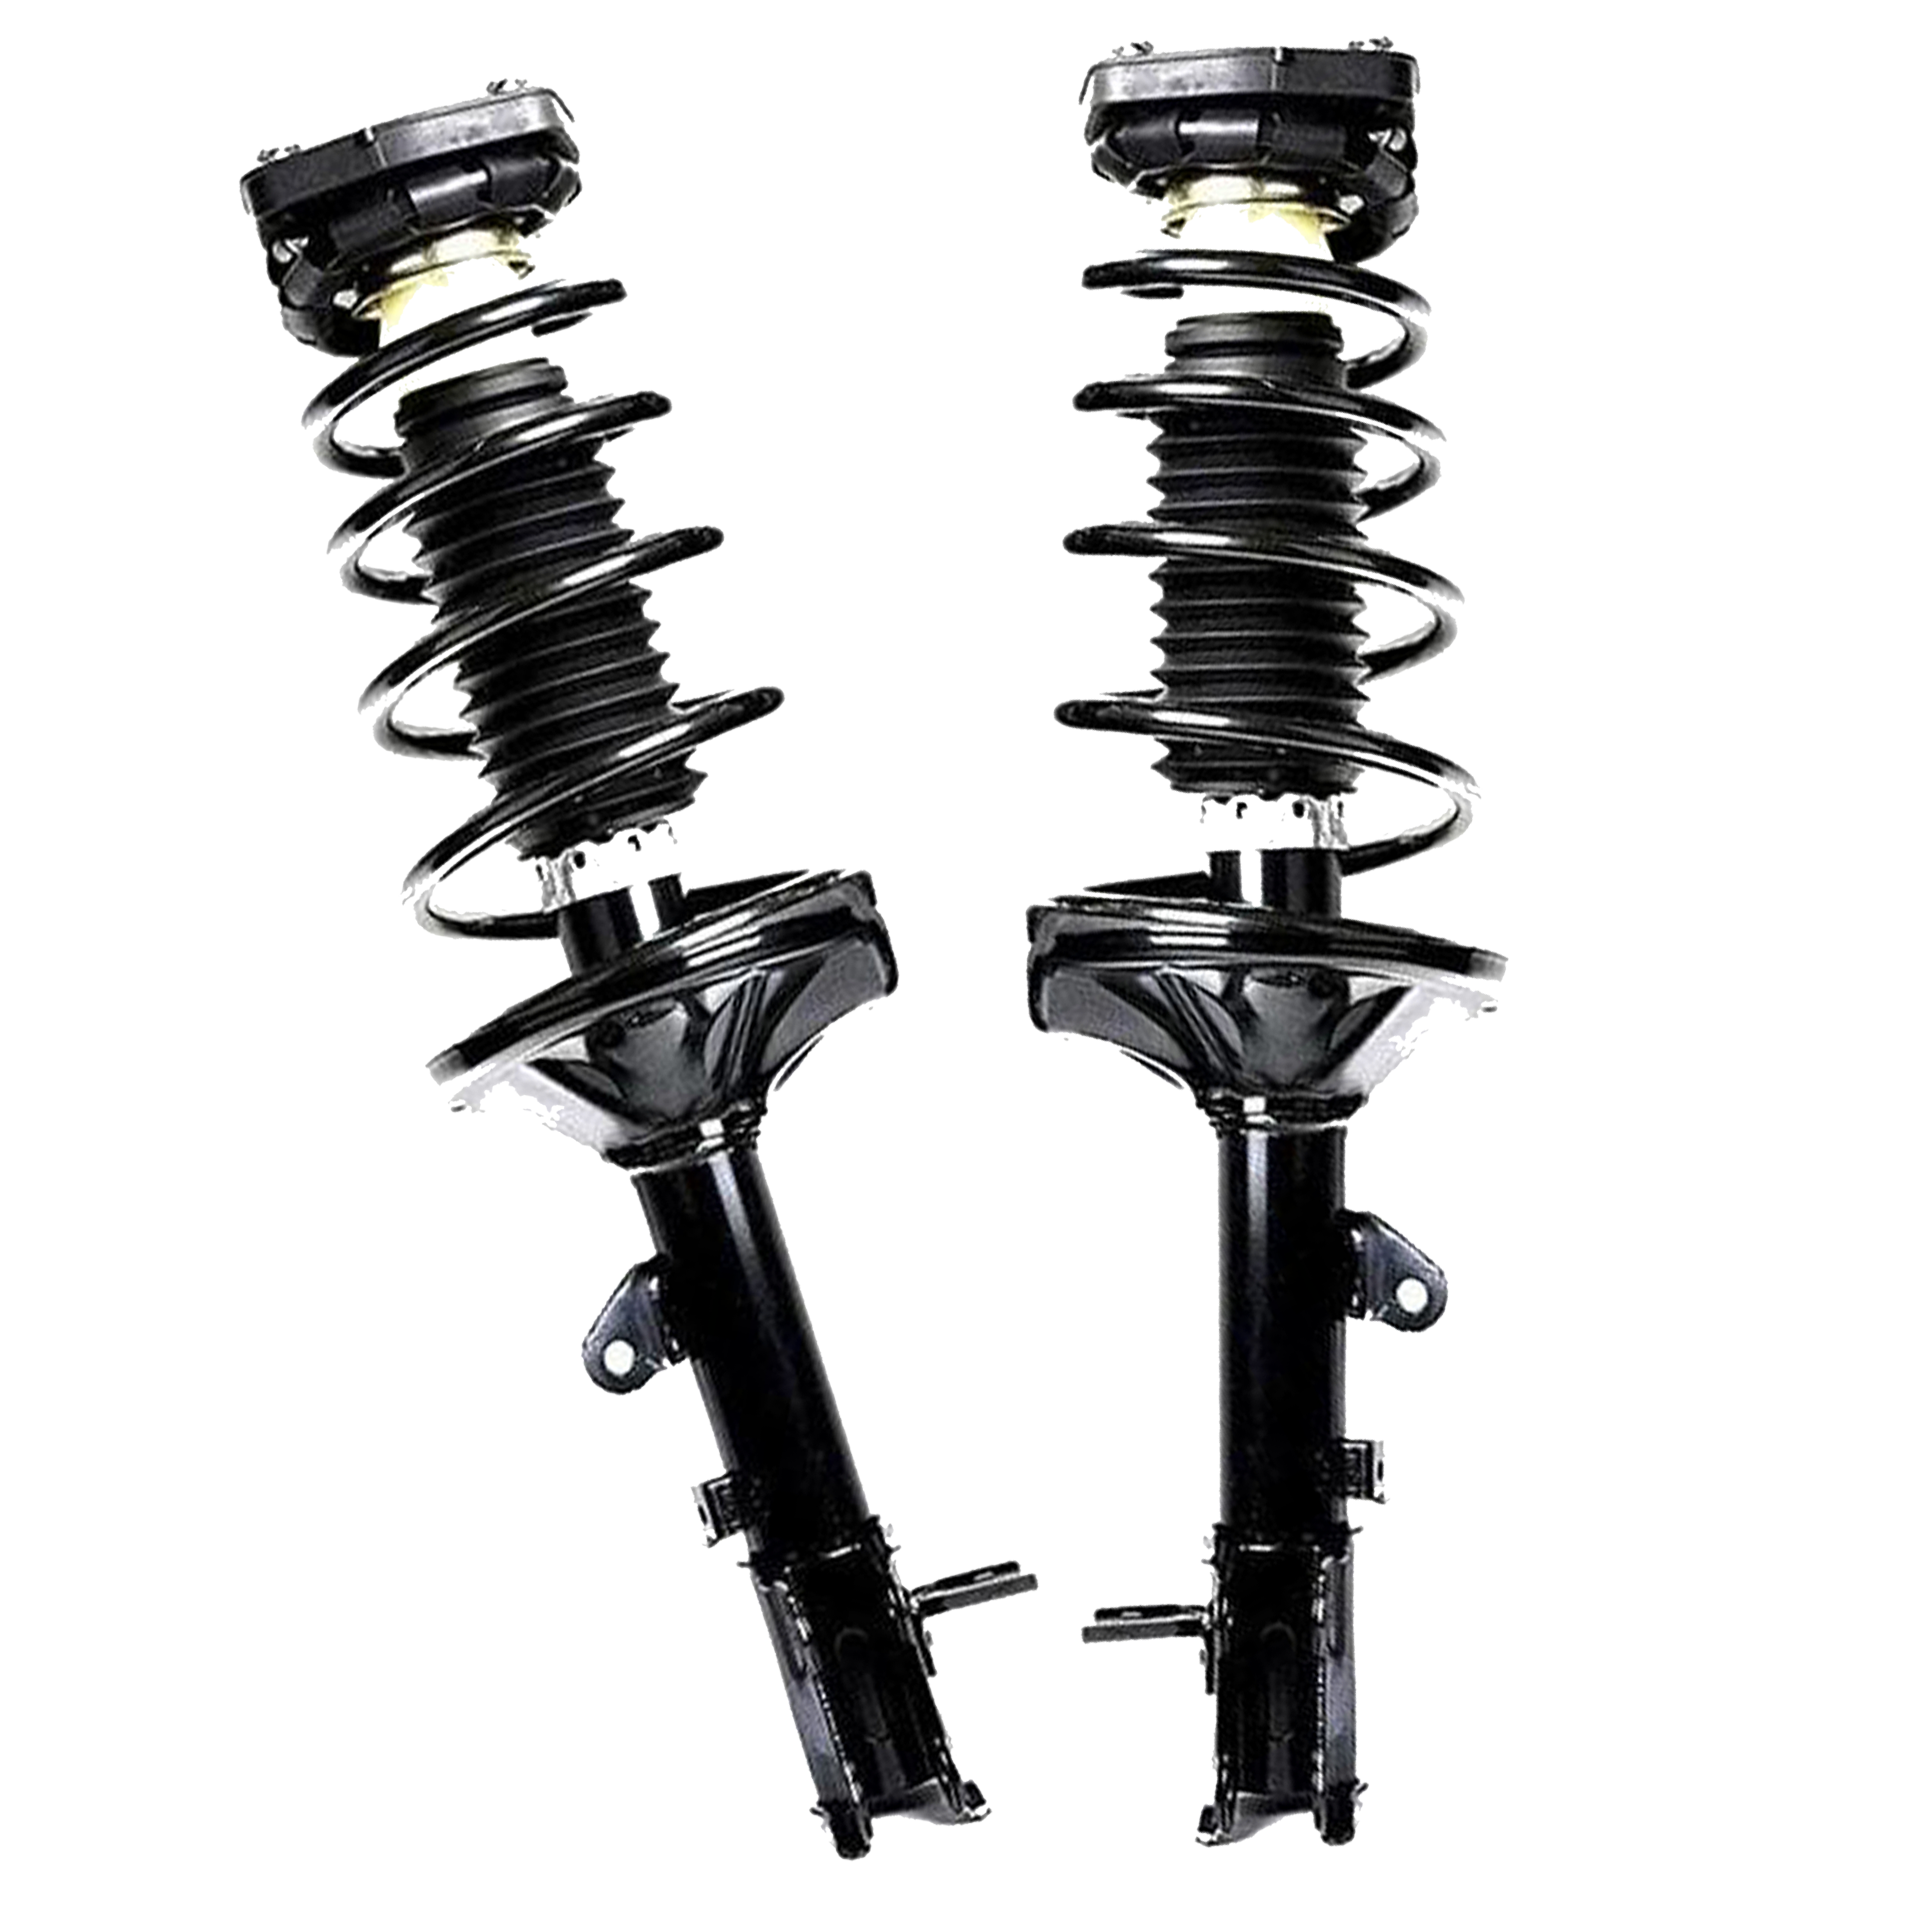 Shoxtec Rear Complete Struts assembly for 2000 - 2006 Hyundai Elantra 2.0L I4 Coil Spring Assembly Shock Absorber Repl. Part no. 171406 171407 - image 2 of 7